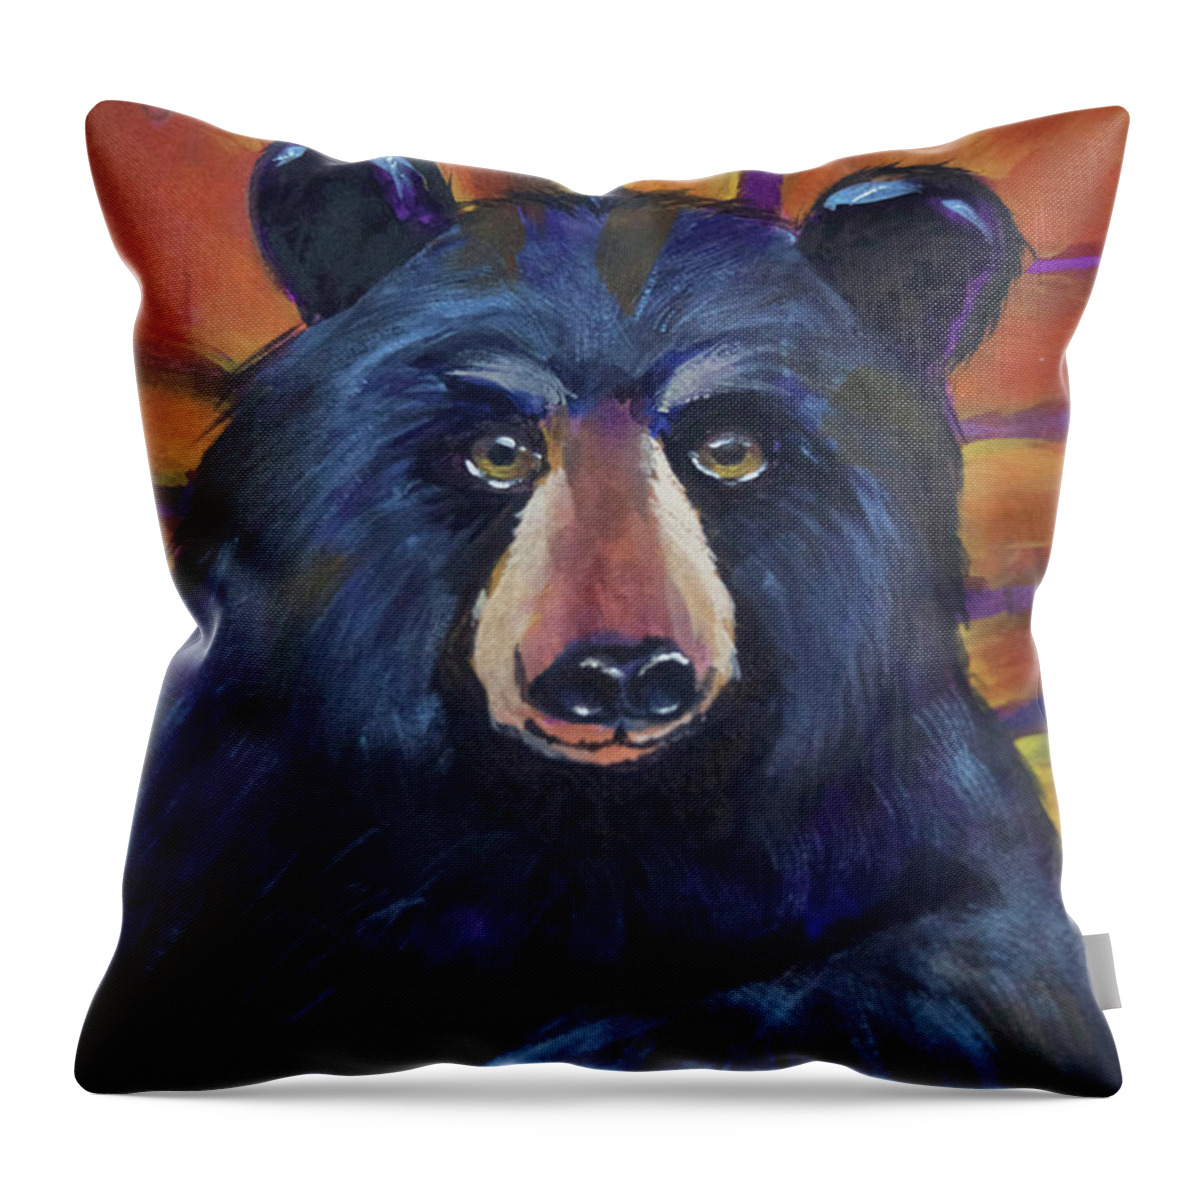 Stylized Black Bear Throw Pillow featuring the painting Colorful Black Bear by Jeanette Mahoney